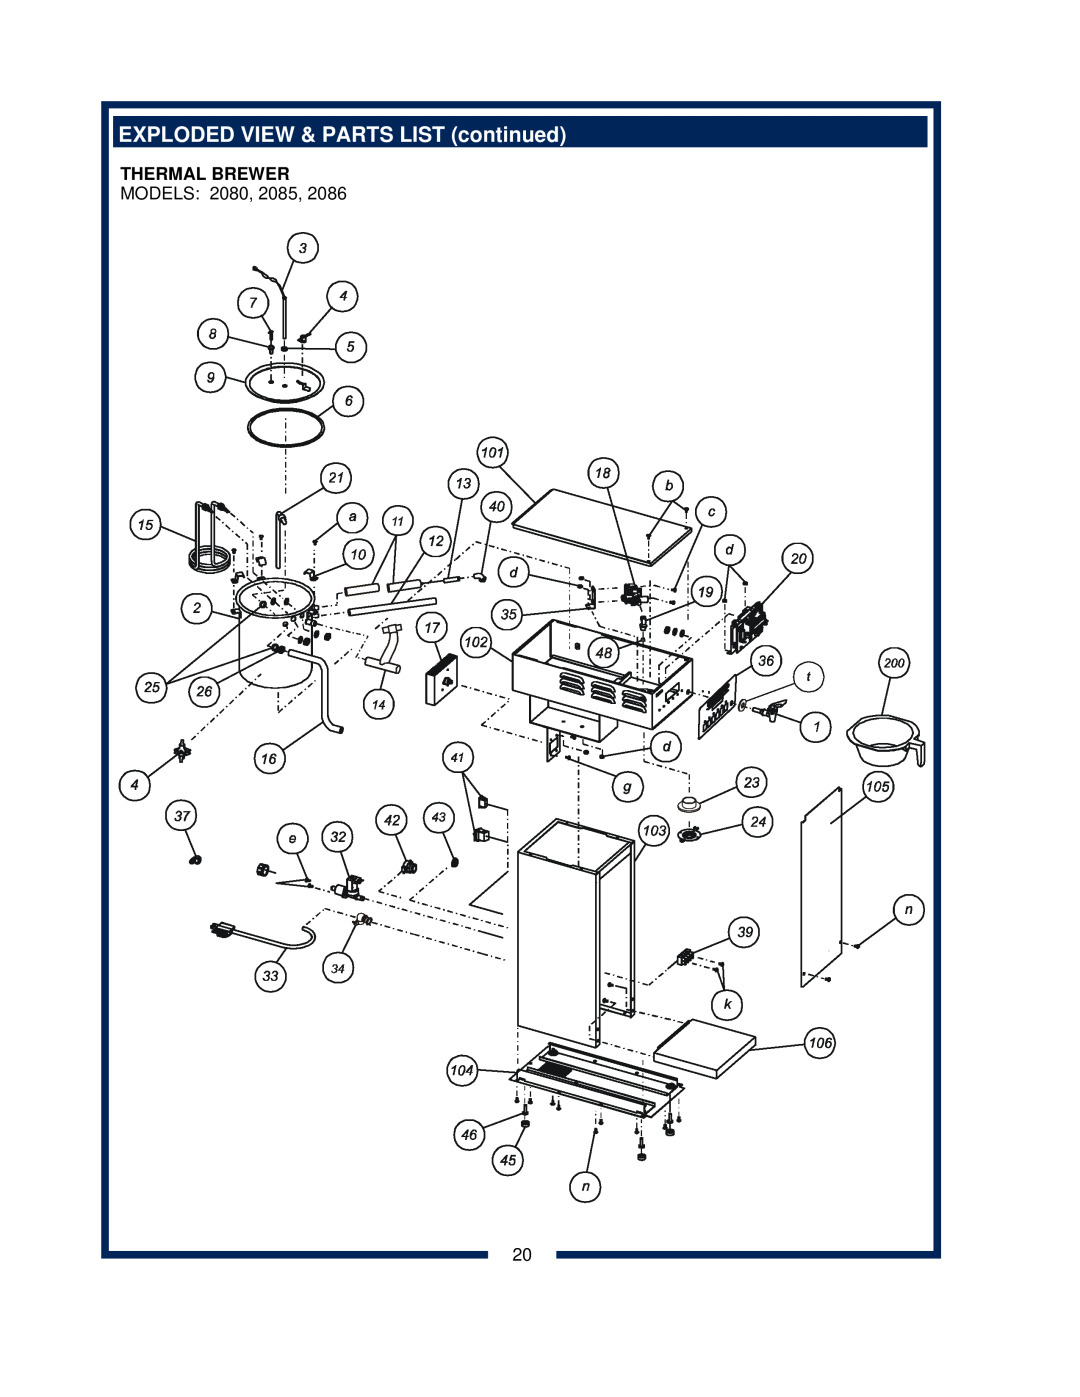 Bloomfield 2080, 2088EX, 2086EX, 2082 owner manual EXPLODED VIEW & PARTS LIST continued, Thermal Brewer 